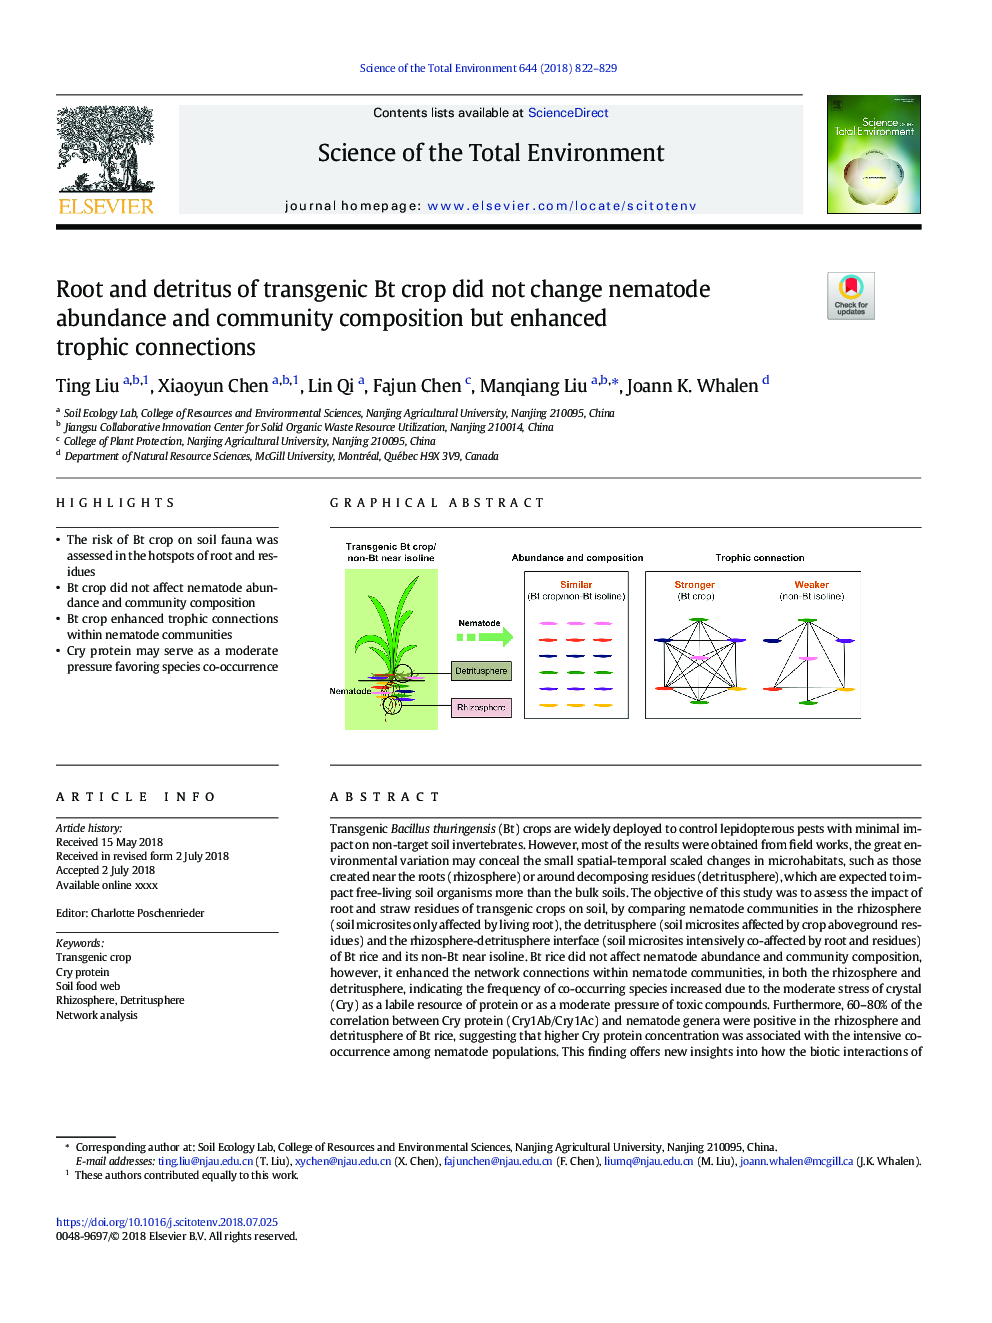 Root and detritus of transgenic Bt crop did not change nematode abundance and community composition but enhanced trophic connections